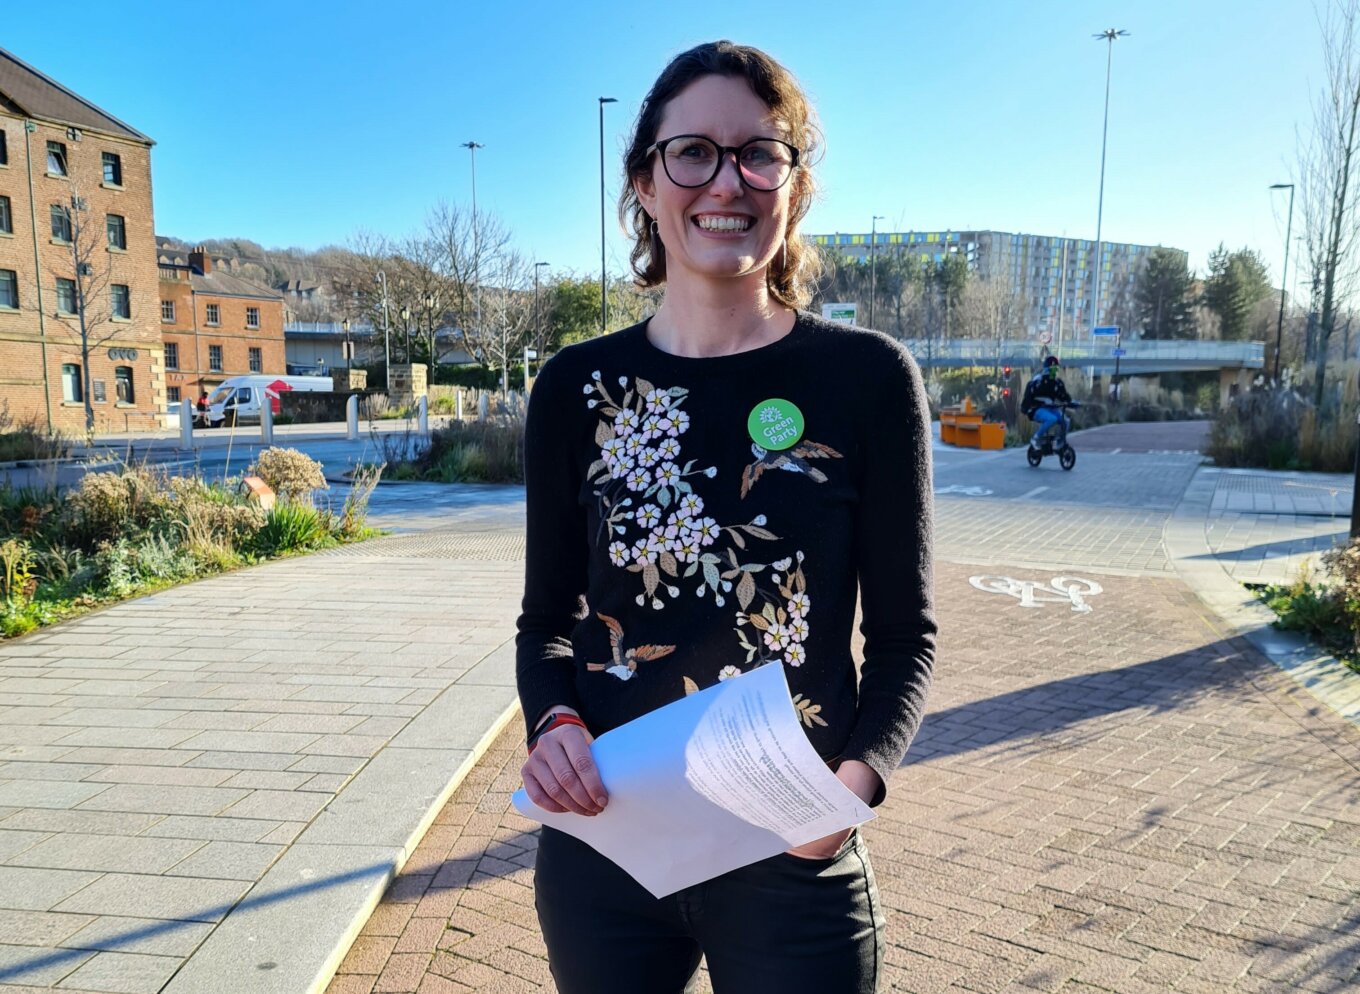 Bex Whyman Green Mayoral candidate